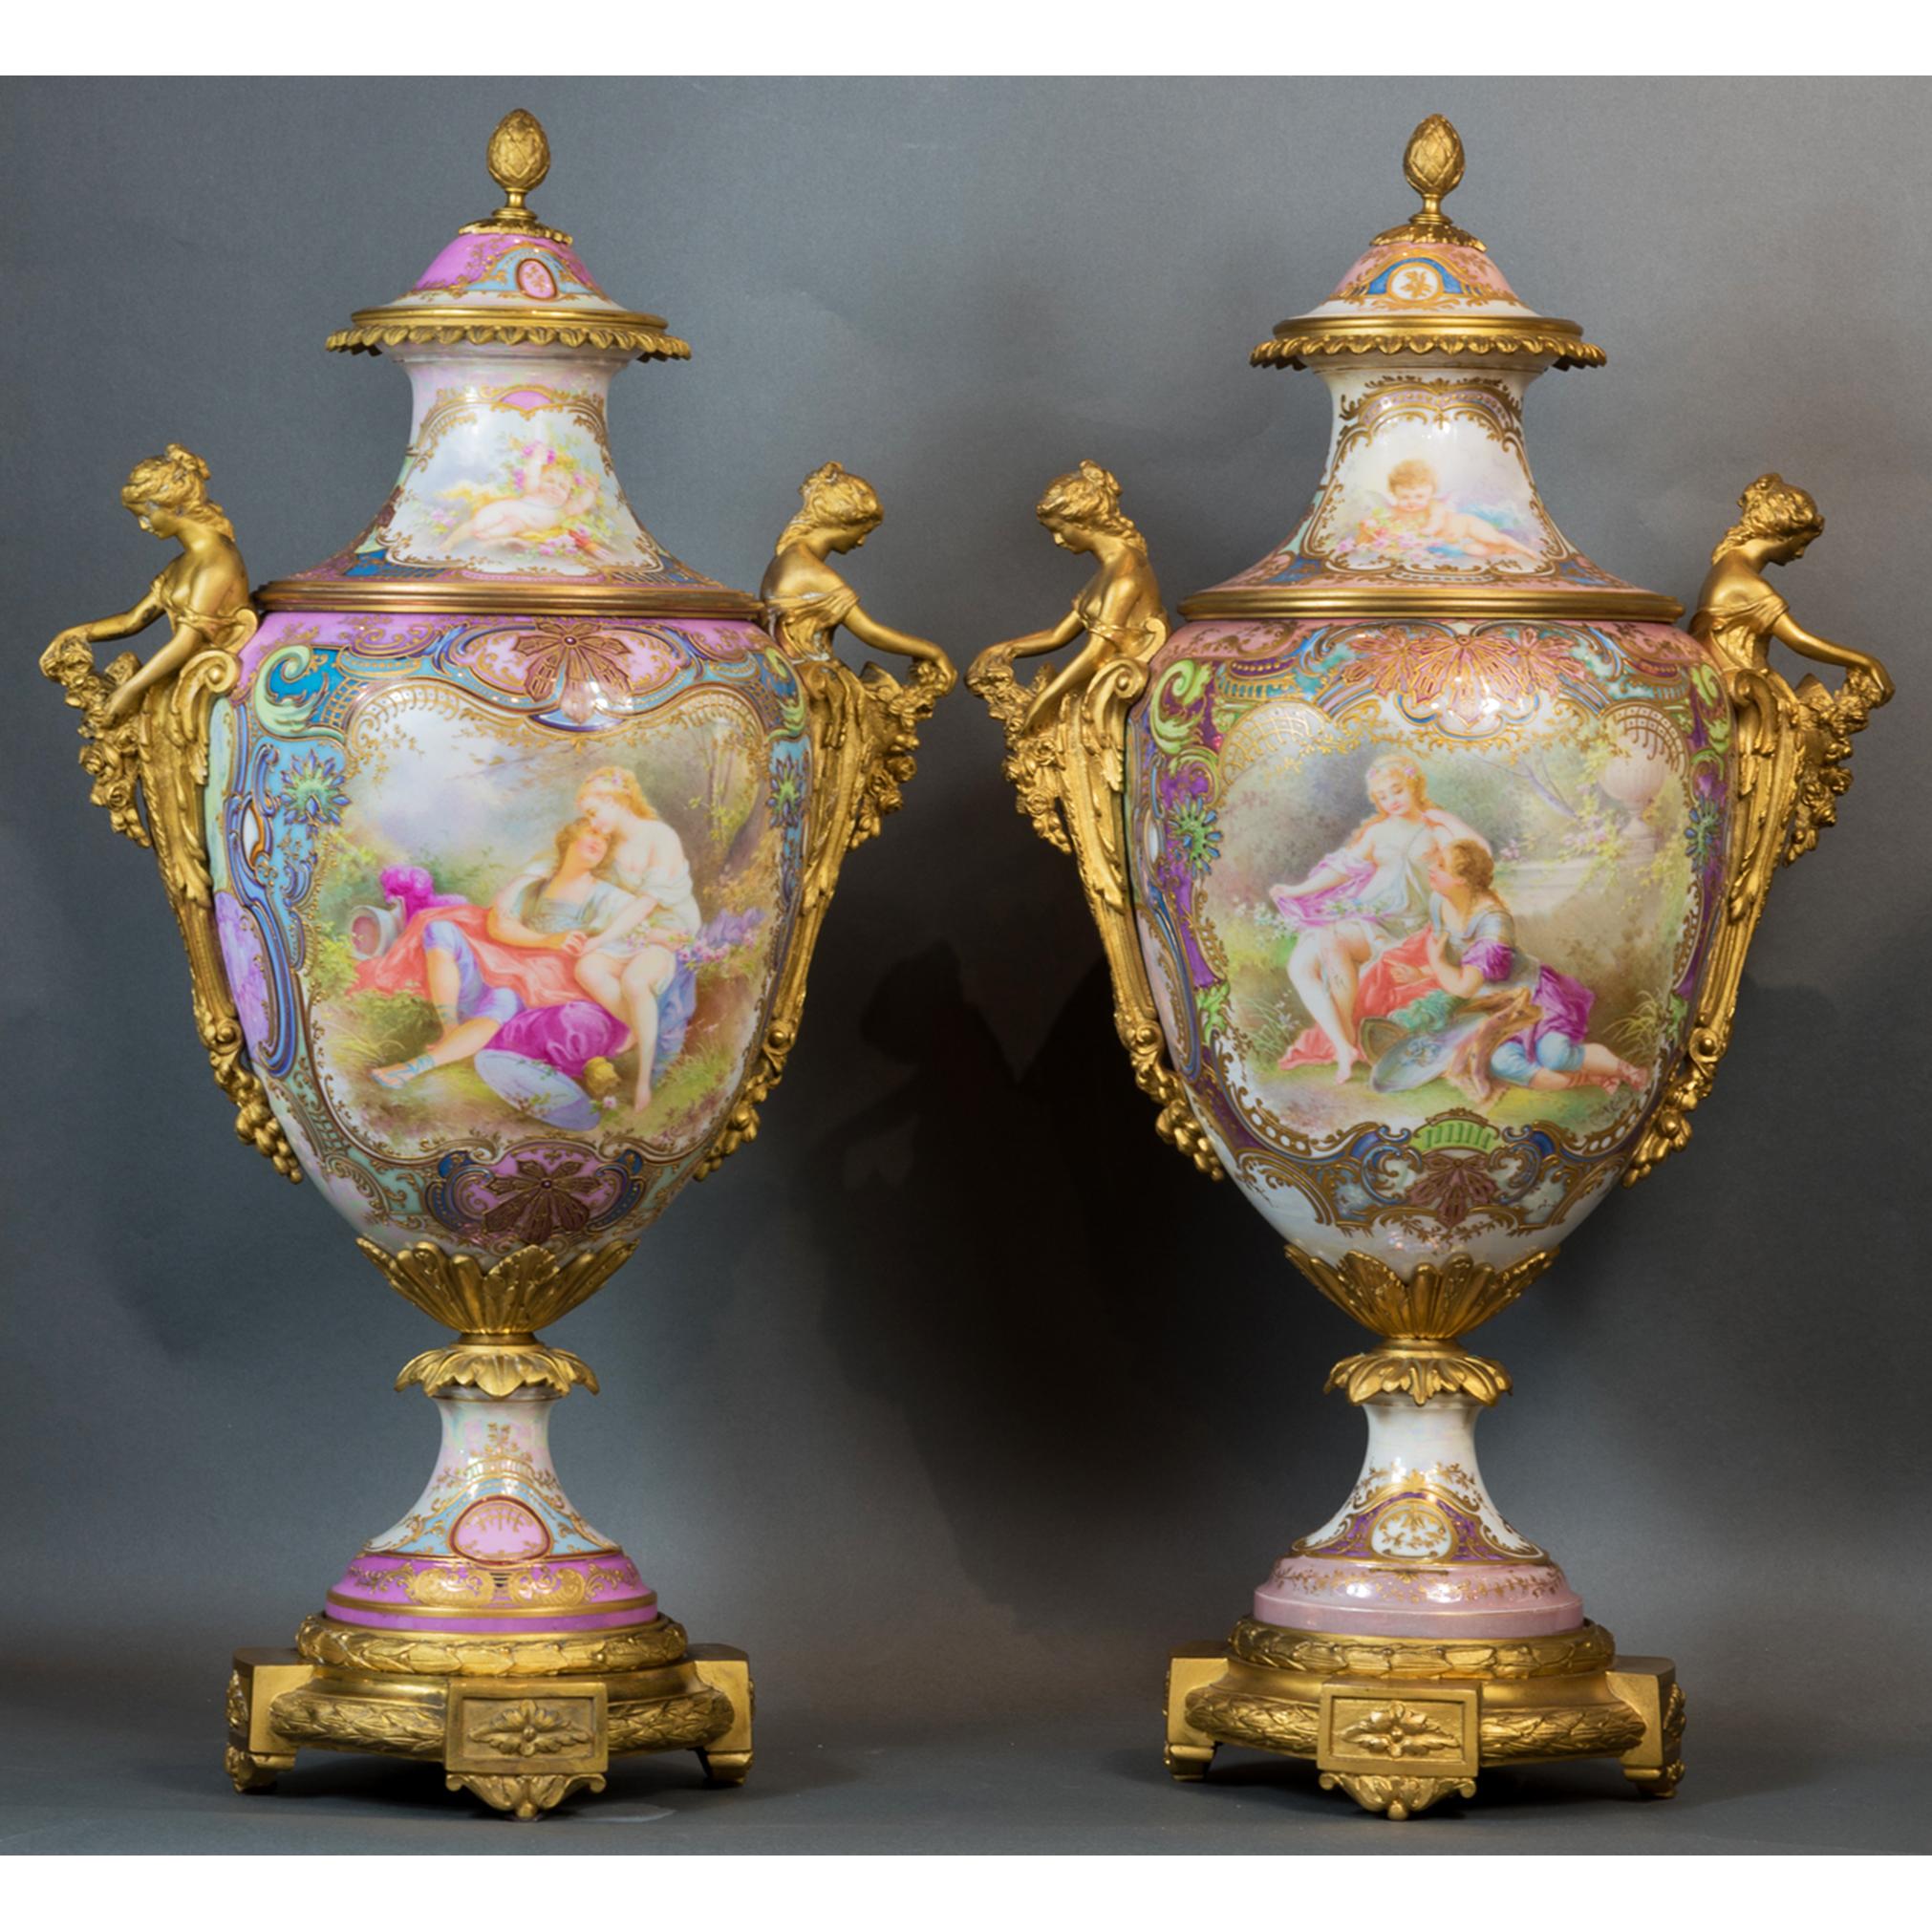 19th Century Pair of Ormolu-Mounted Sevres Style Vases with Garden Scene by A. Collot For Sale